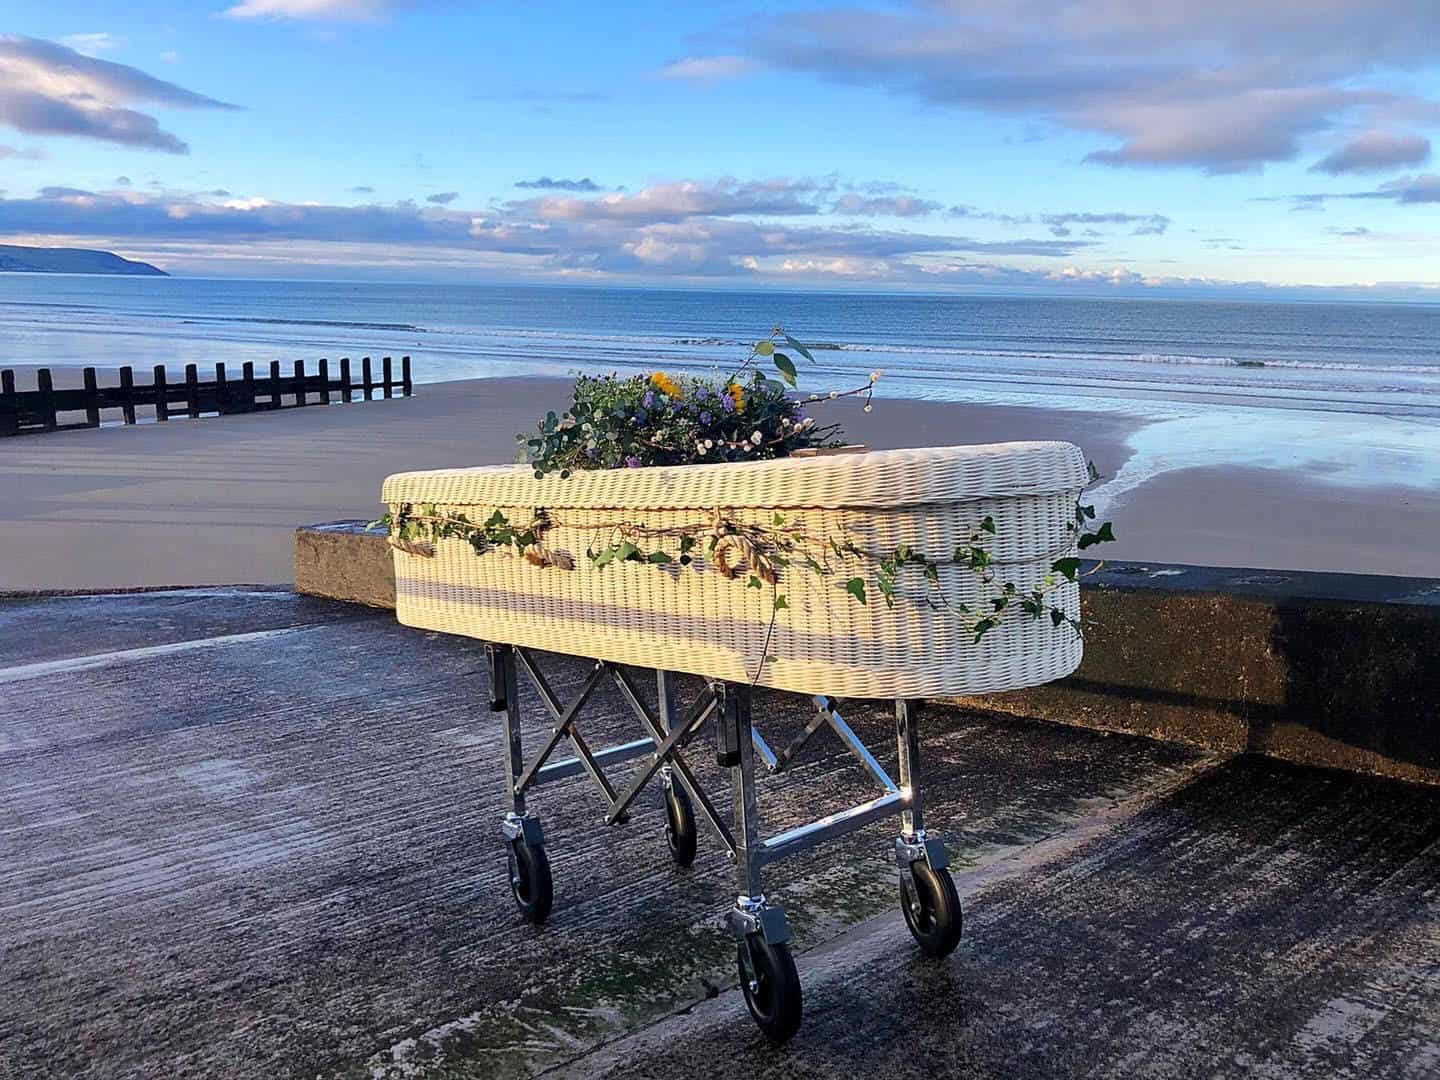 Sustainable wicker coffin decorated with fresh flowers and green foliage, set on a trolley against the backdrop of a calm beach and distant hills under a clear sky.